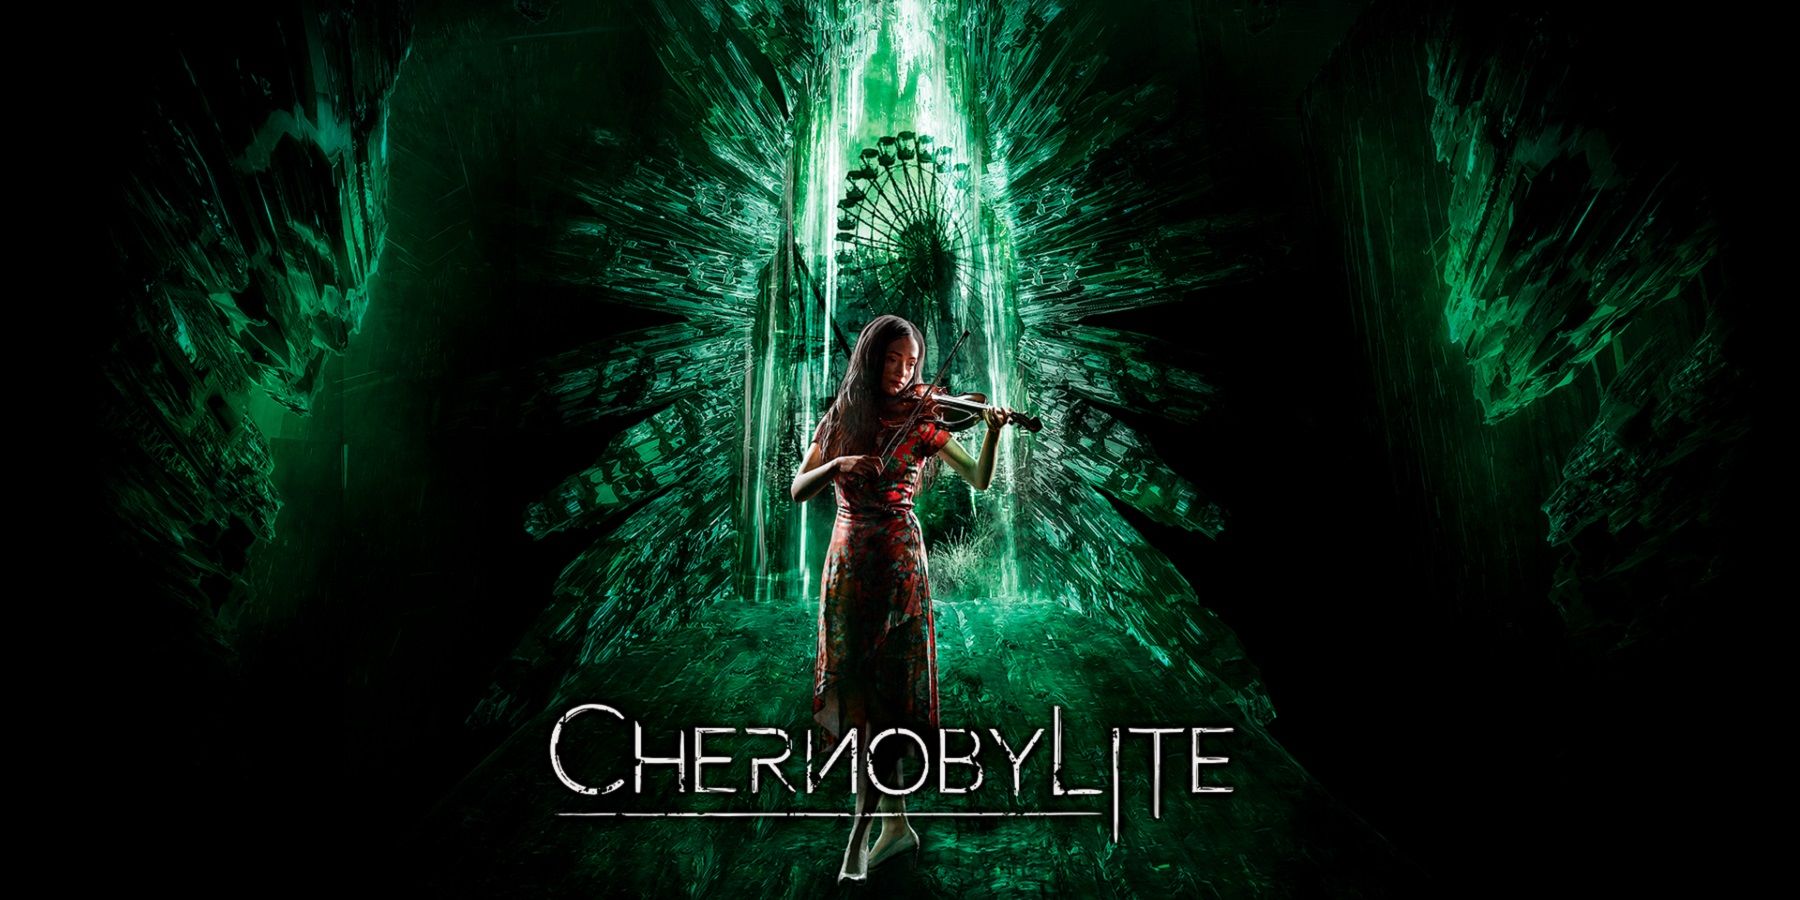 Image from Chernobylite showing a ghostly woman playing a violin in a neon green corridor.